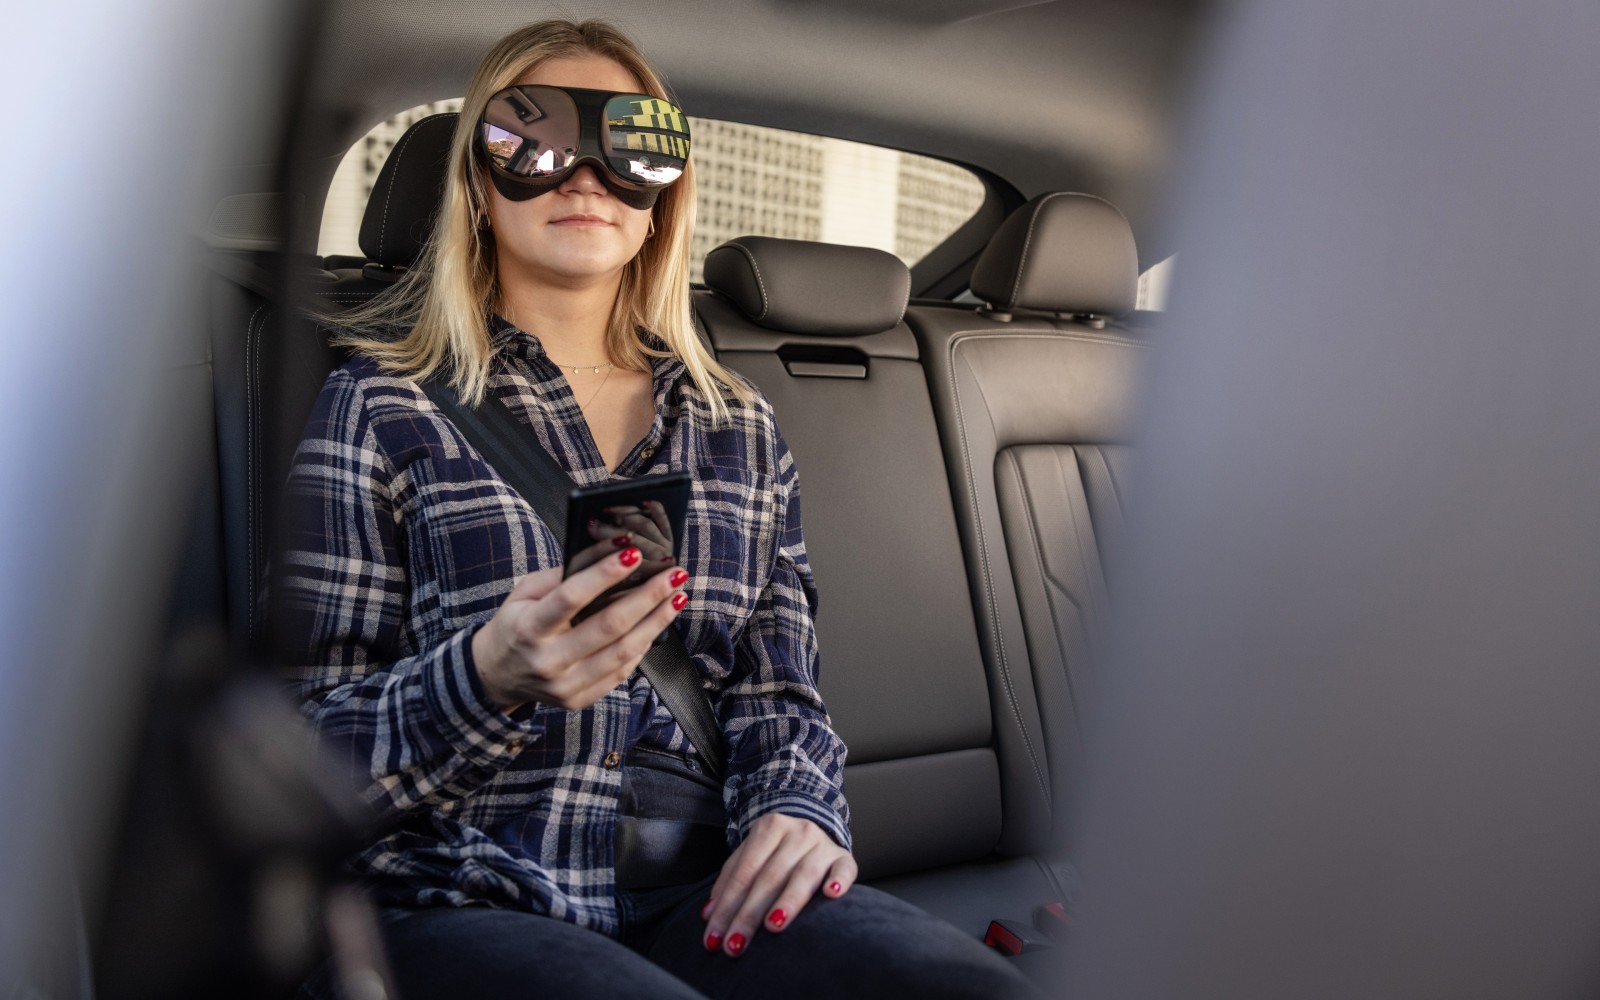 Holoride’s in-vehicle VR tech arrives in Audi autos this summer